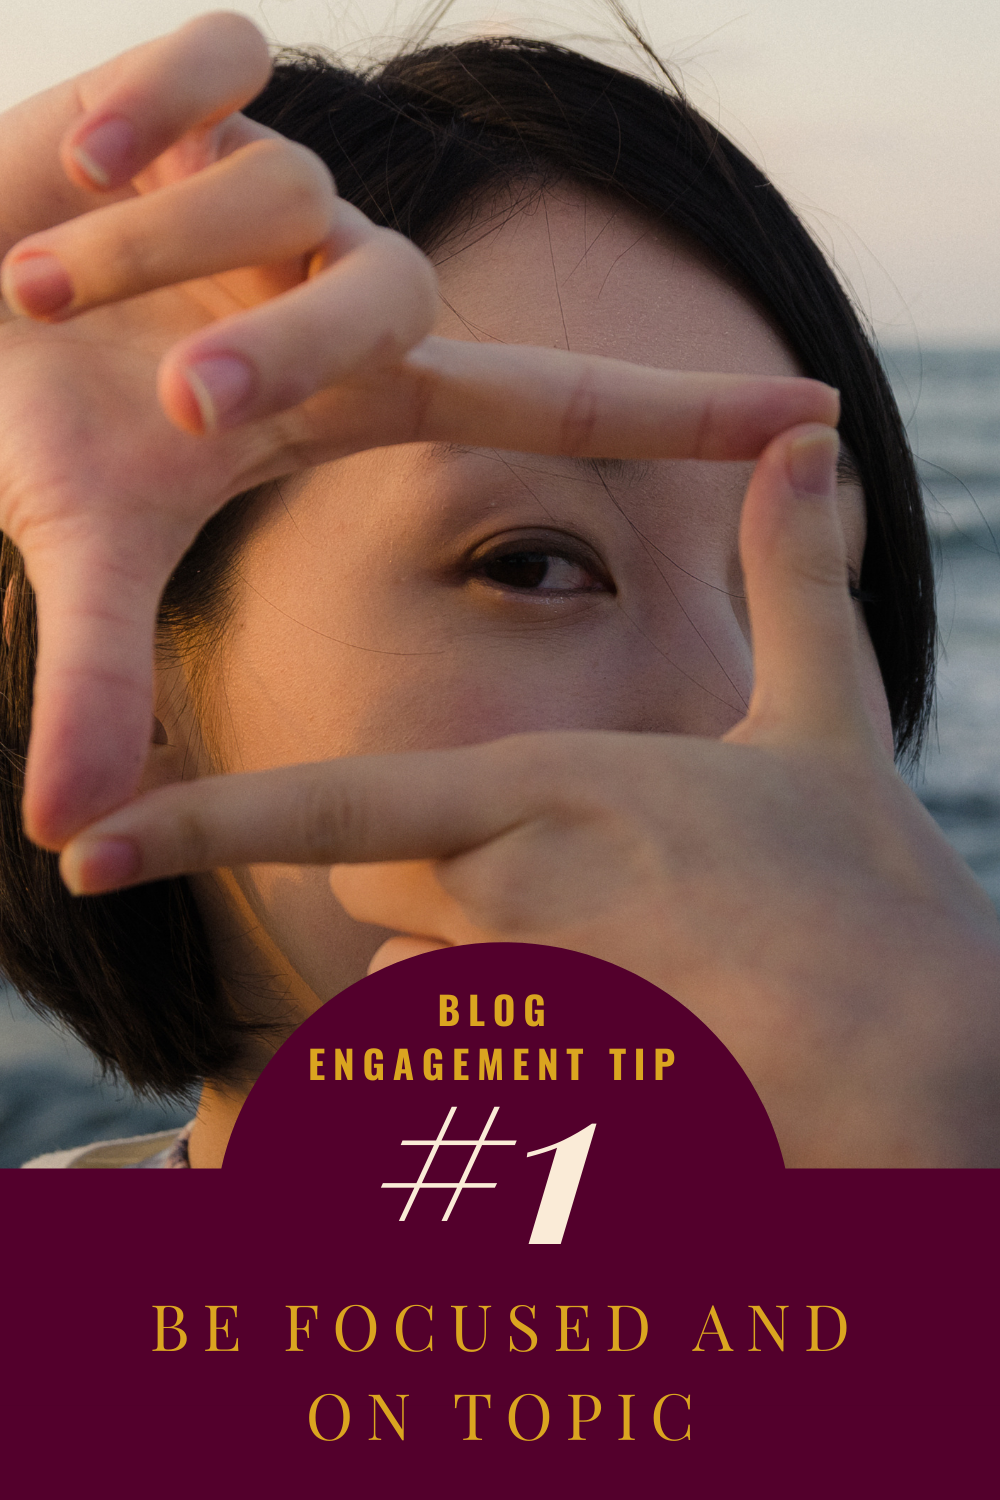 Blog engagement tip #1: Be Focused and On Topic